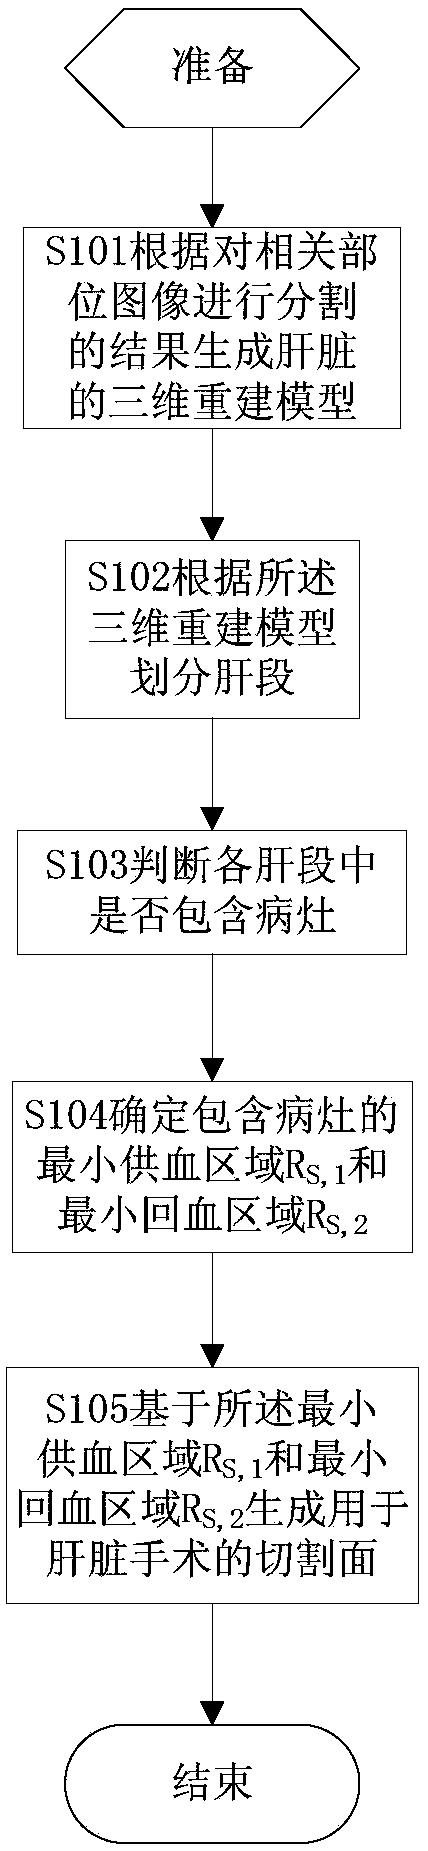 Excision side generating method and device of liver operation